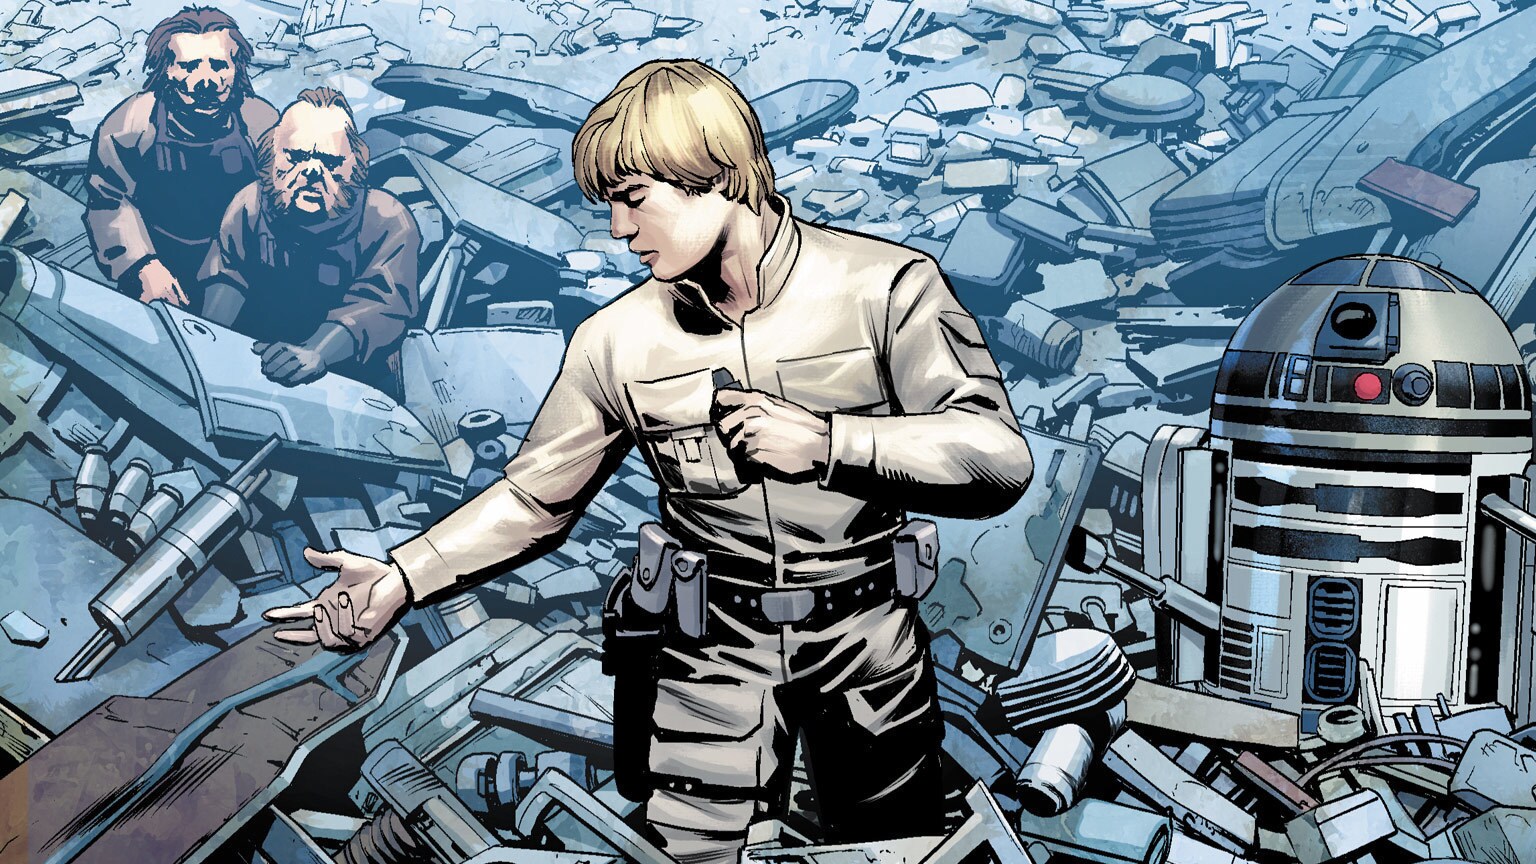 Luke's Hunt for His Lost Lightsaber Continues in Star Wars #4 - Exclusive